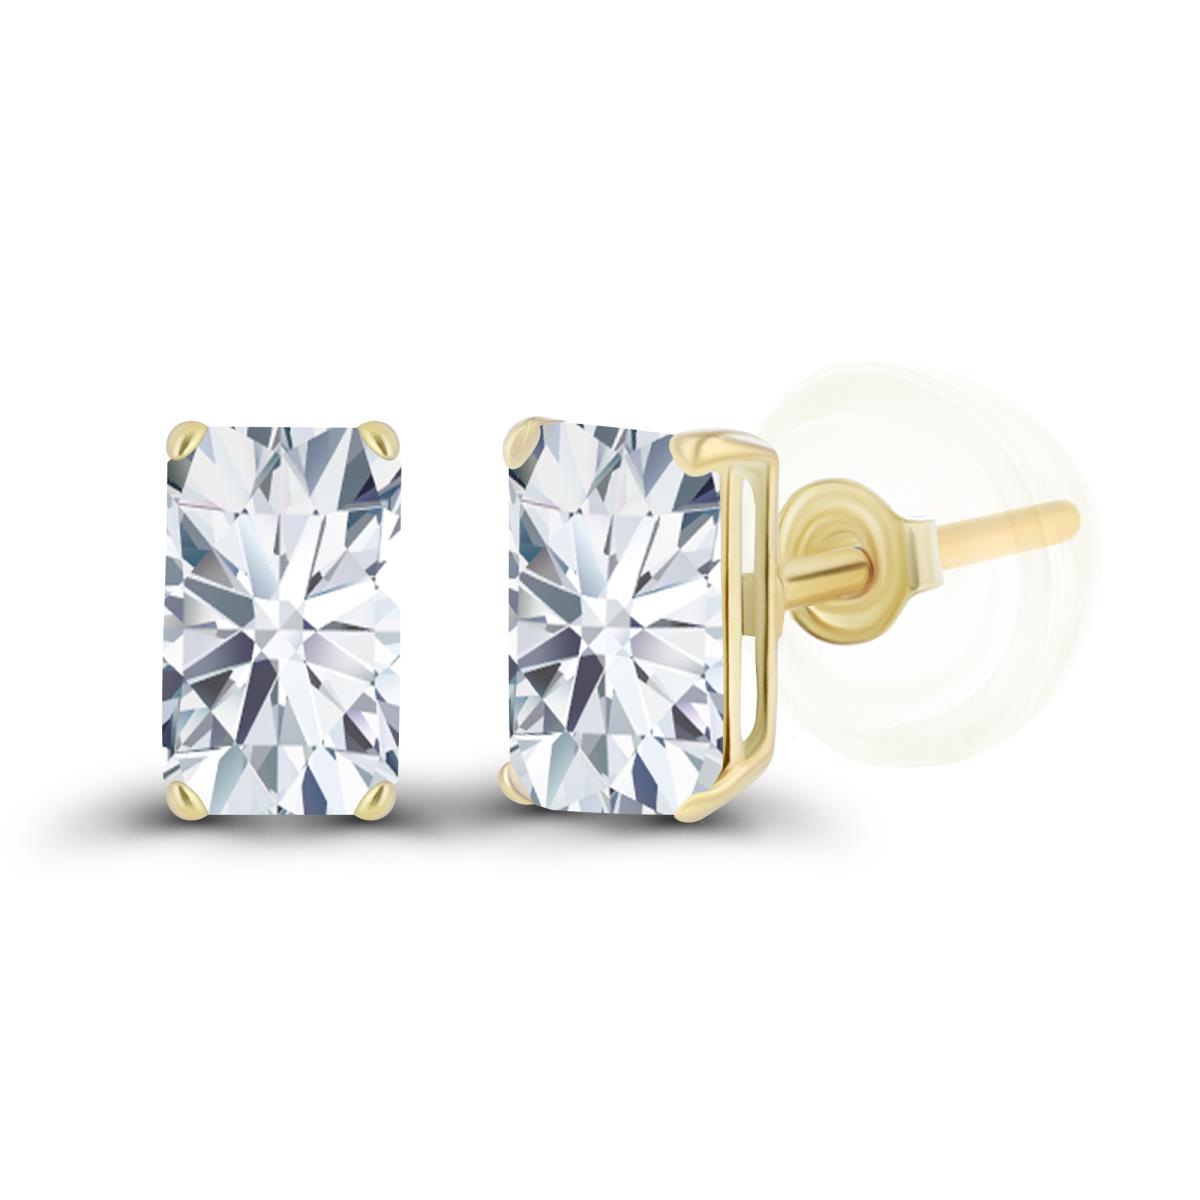 14K Yellow Gold 5x3mm Octagon Created White Sapphire Basket Stud Earrings with Silicone Backs